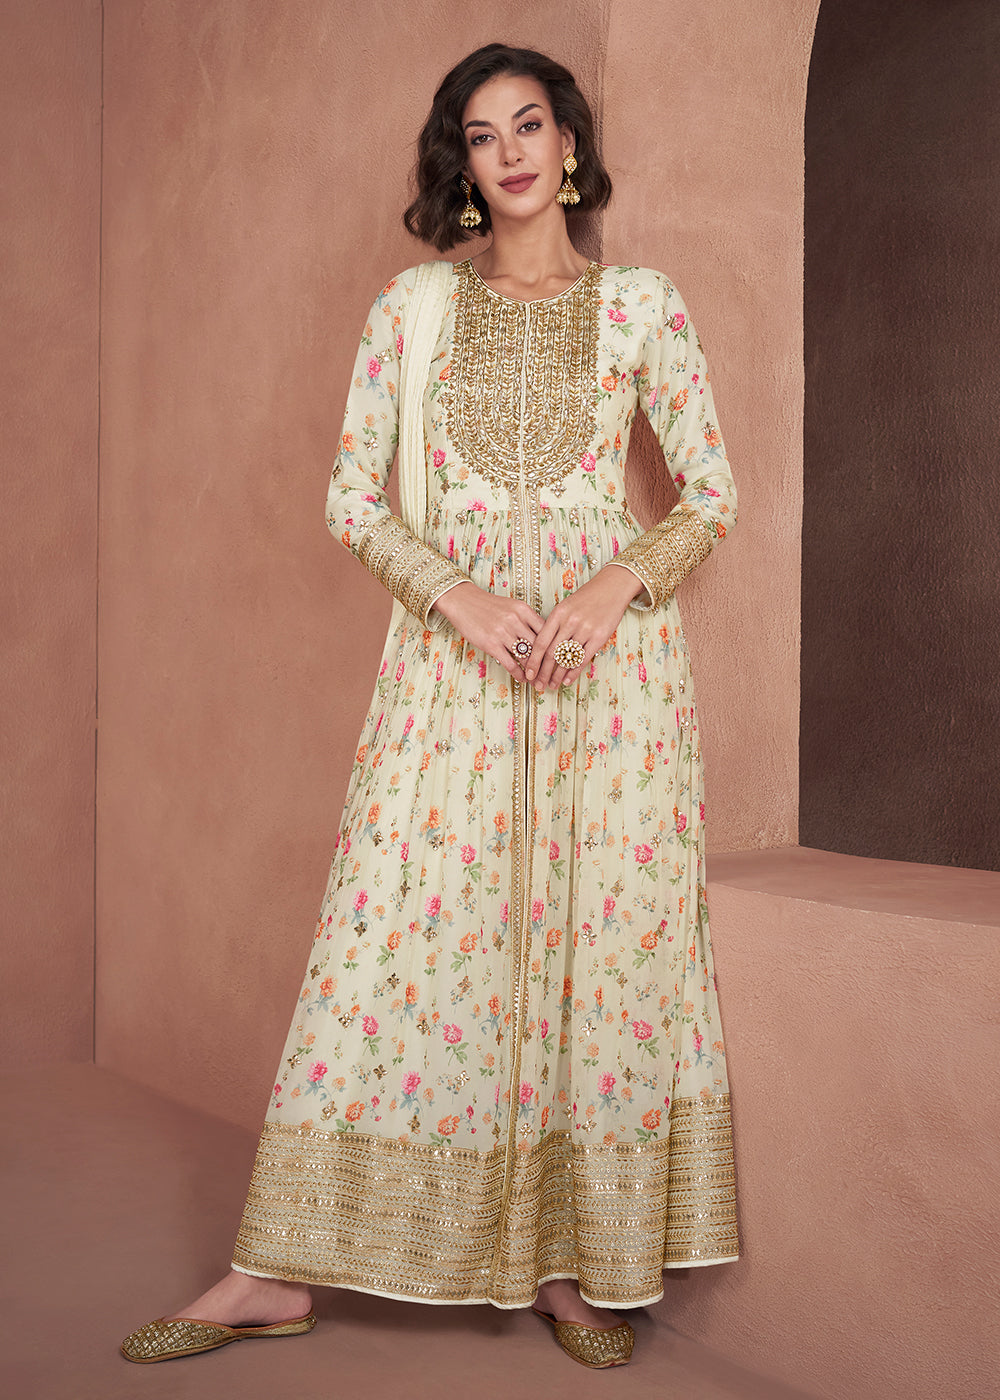 Buy Now Ivory Real Georgette Embroidered & Printed Anarkali Suit Online in USA, UK, Australia, New Zealand, Canada & Worldwide at Empress Clothing.